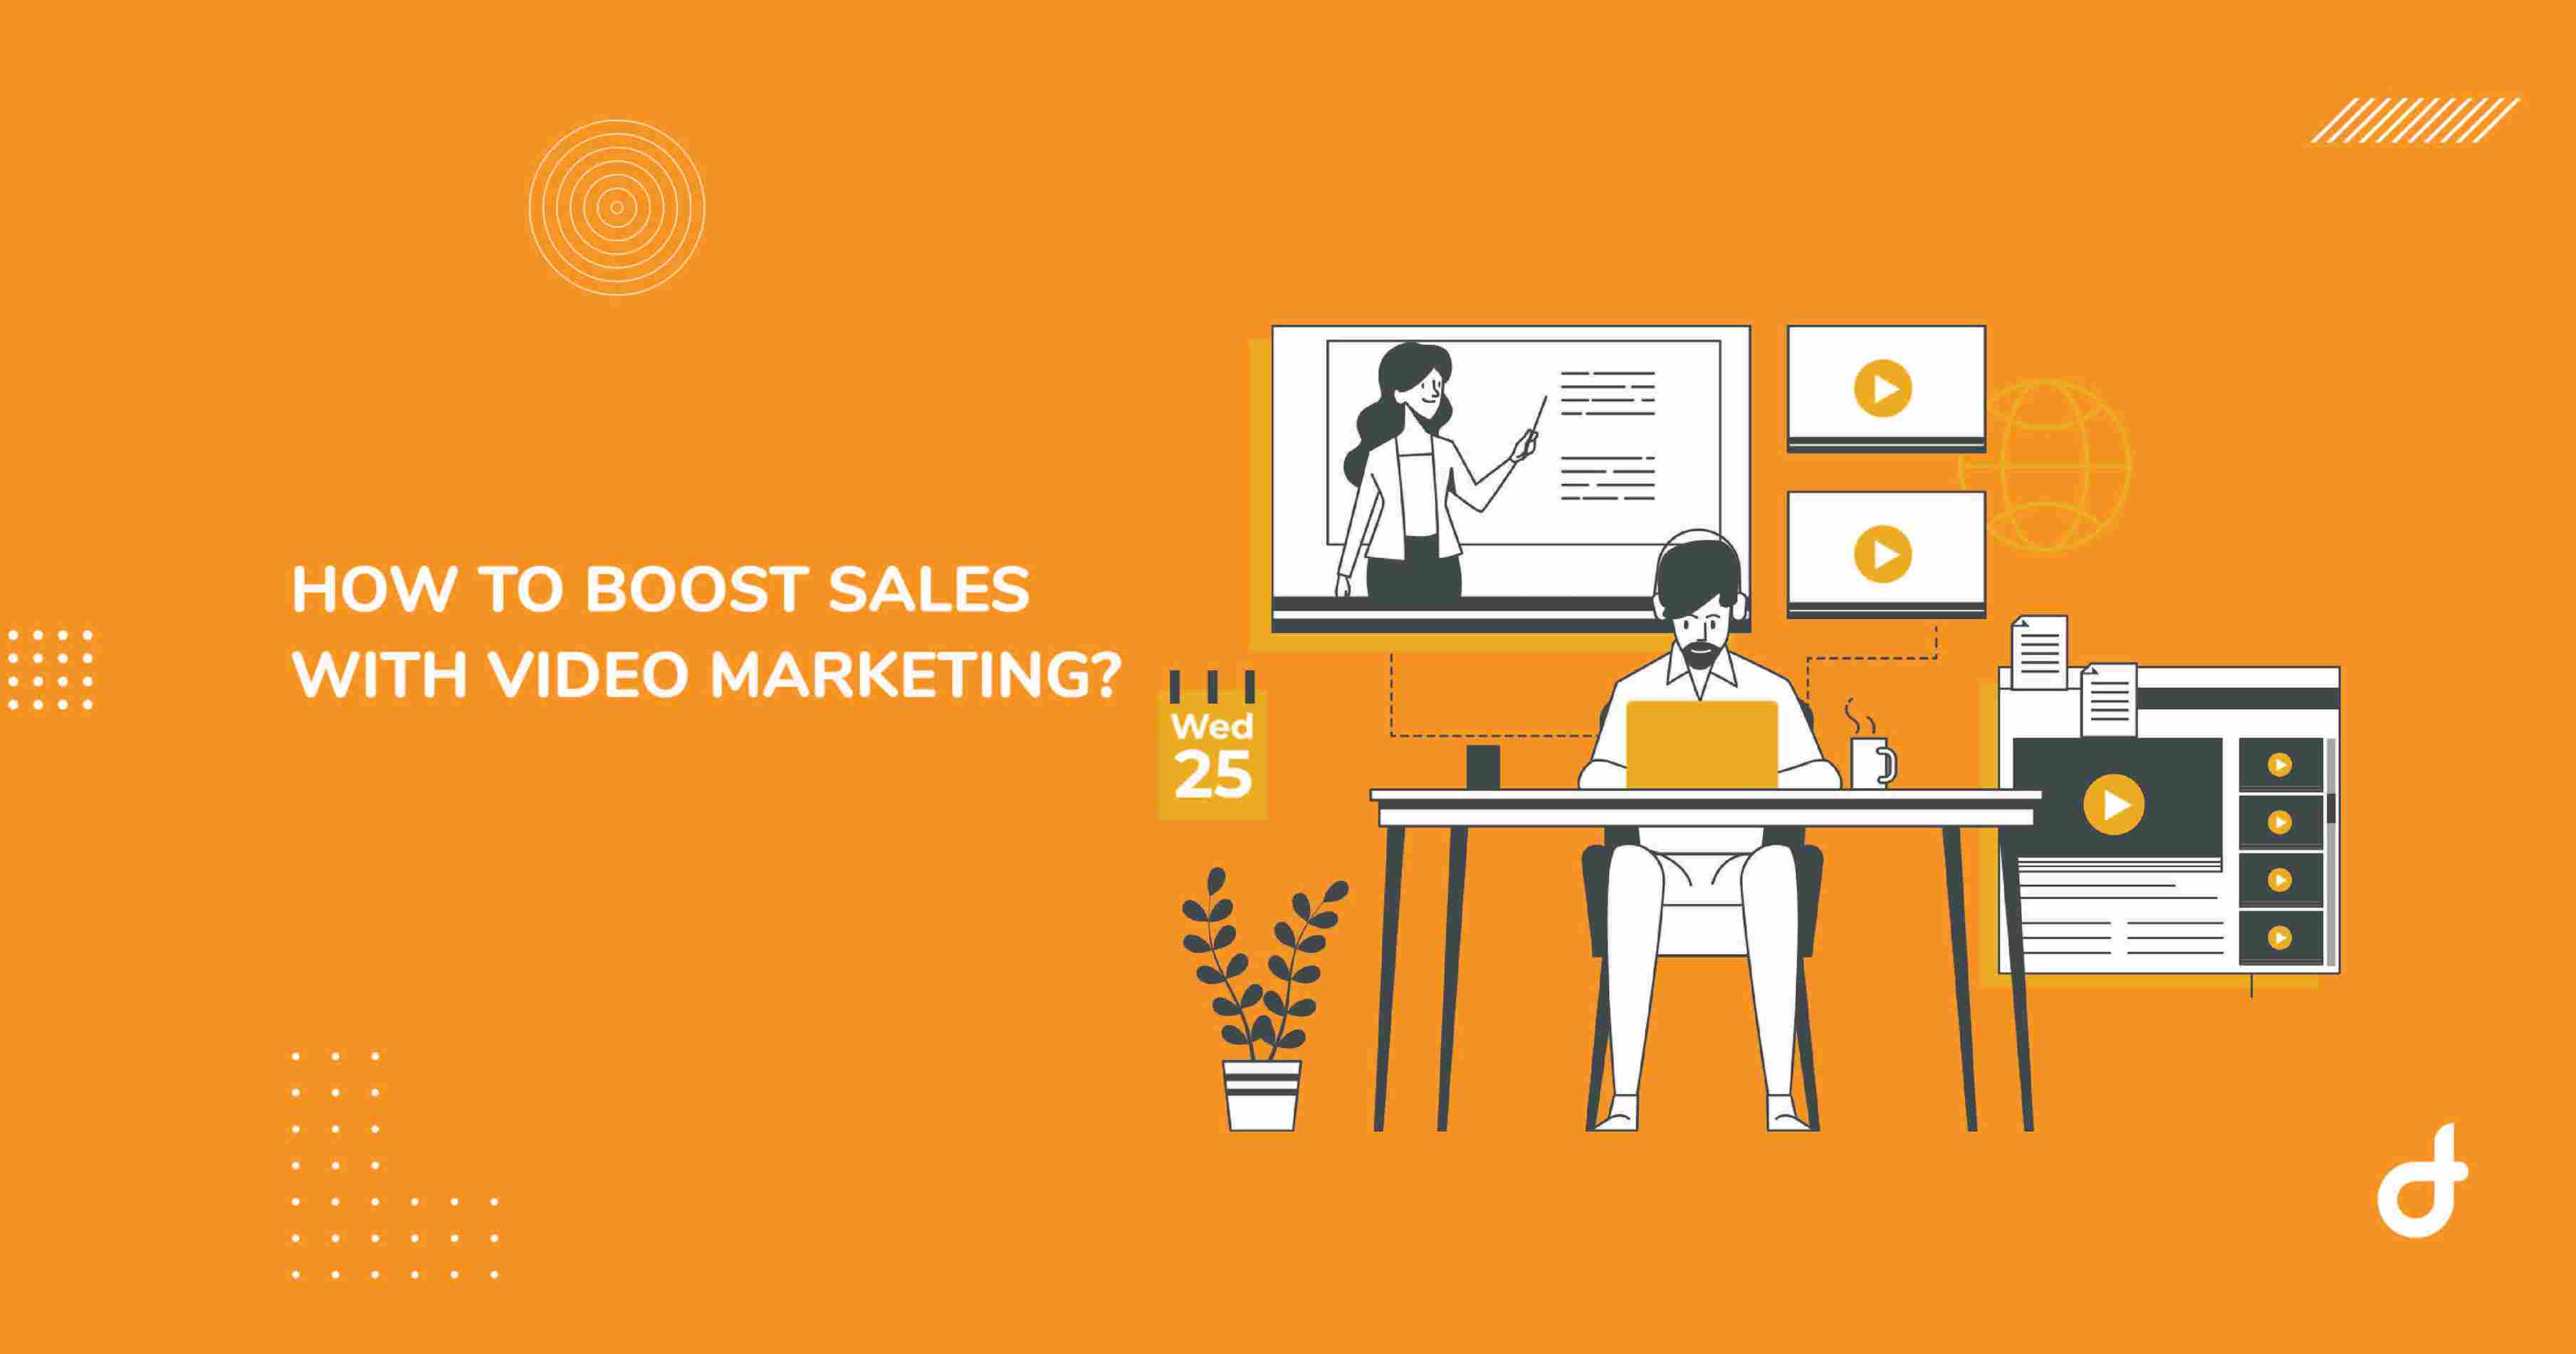 How to Boost Sales With Video Marketing?